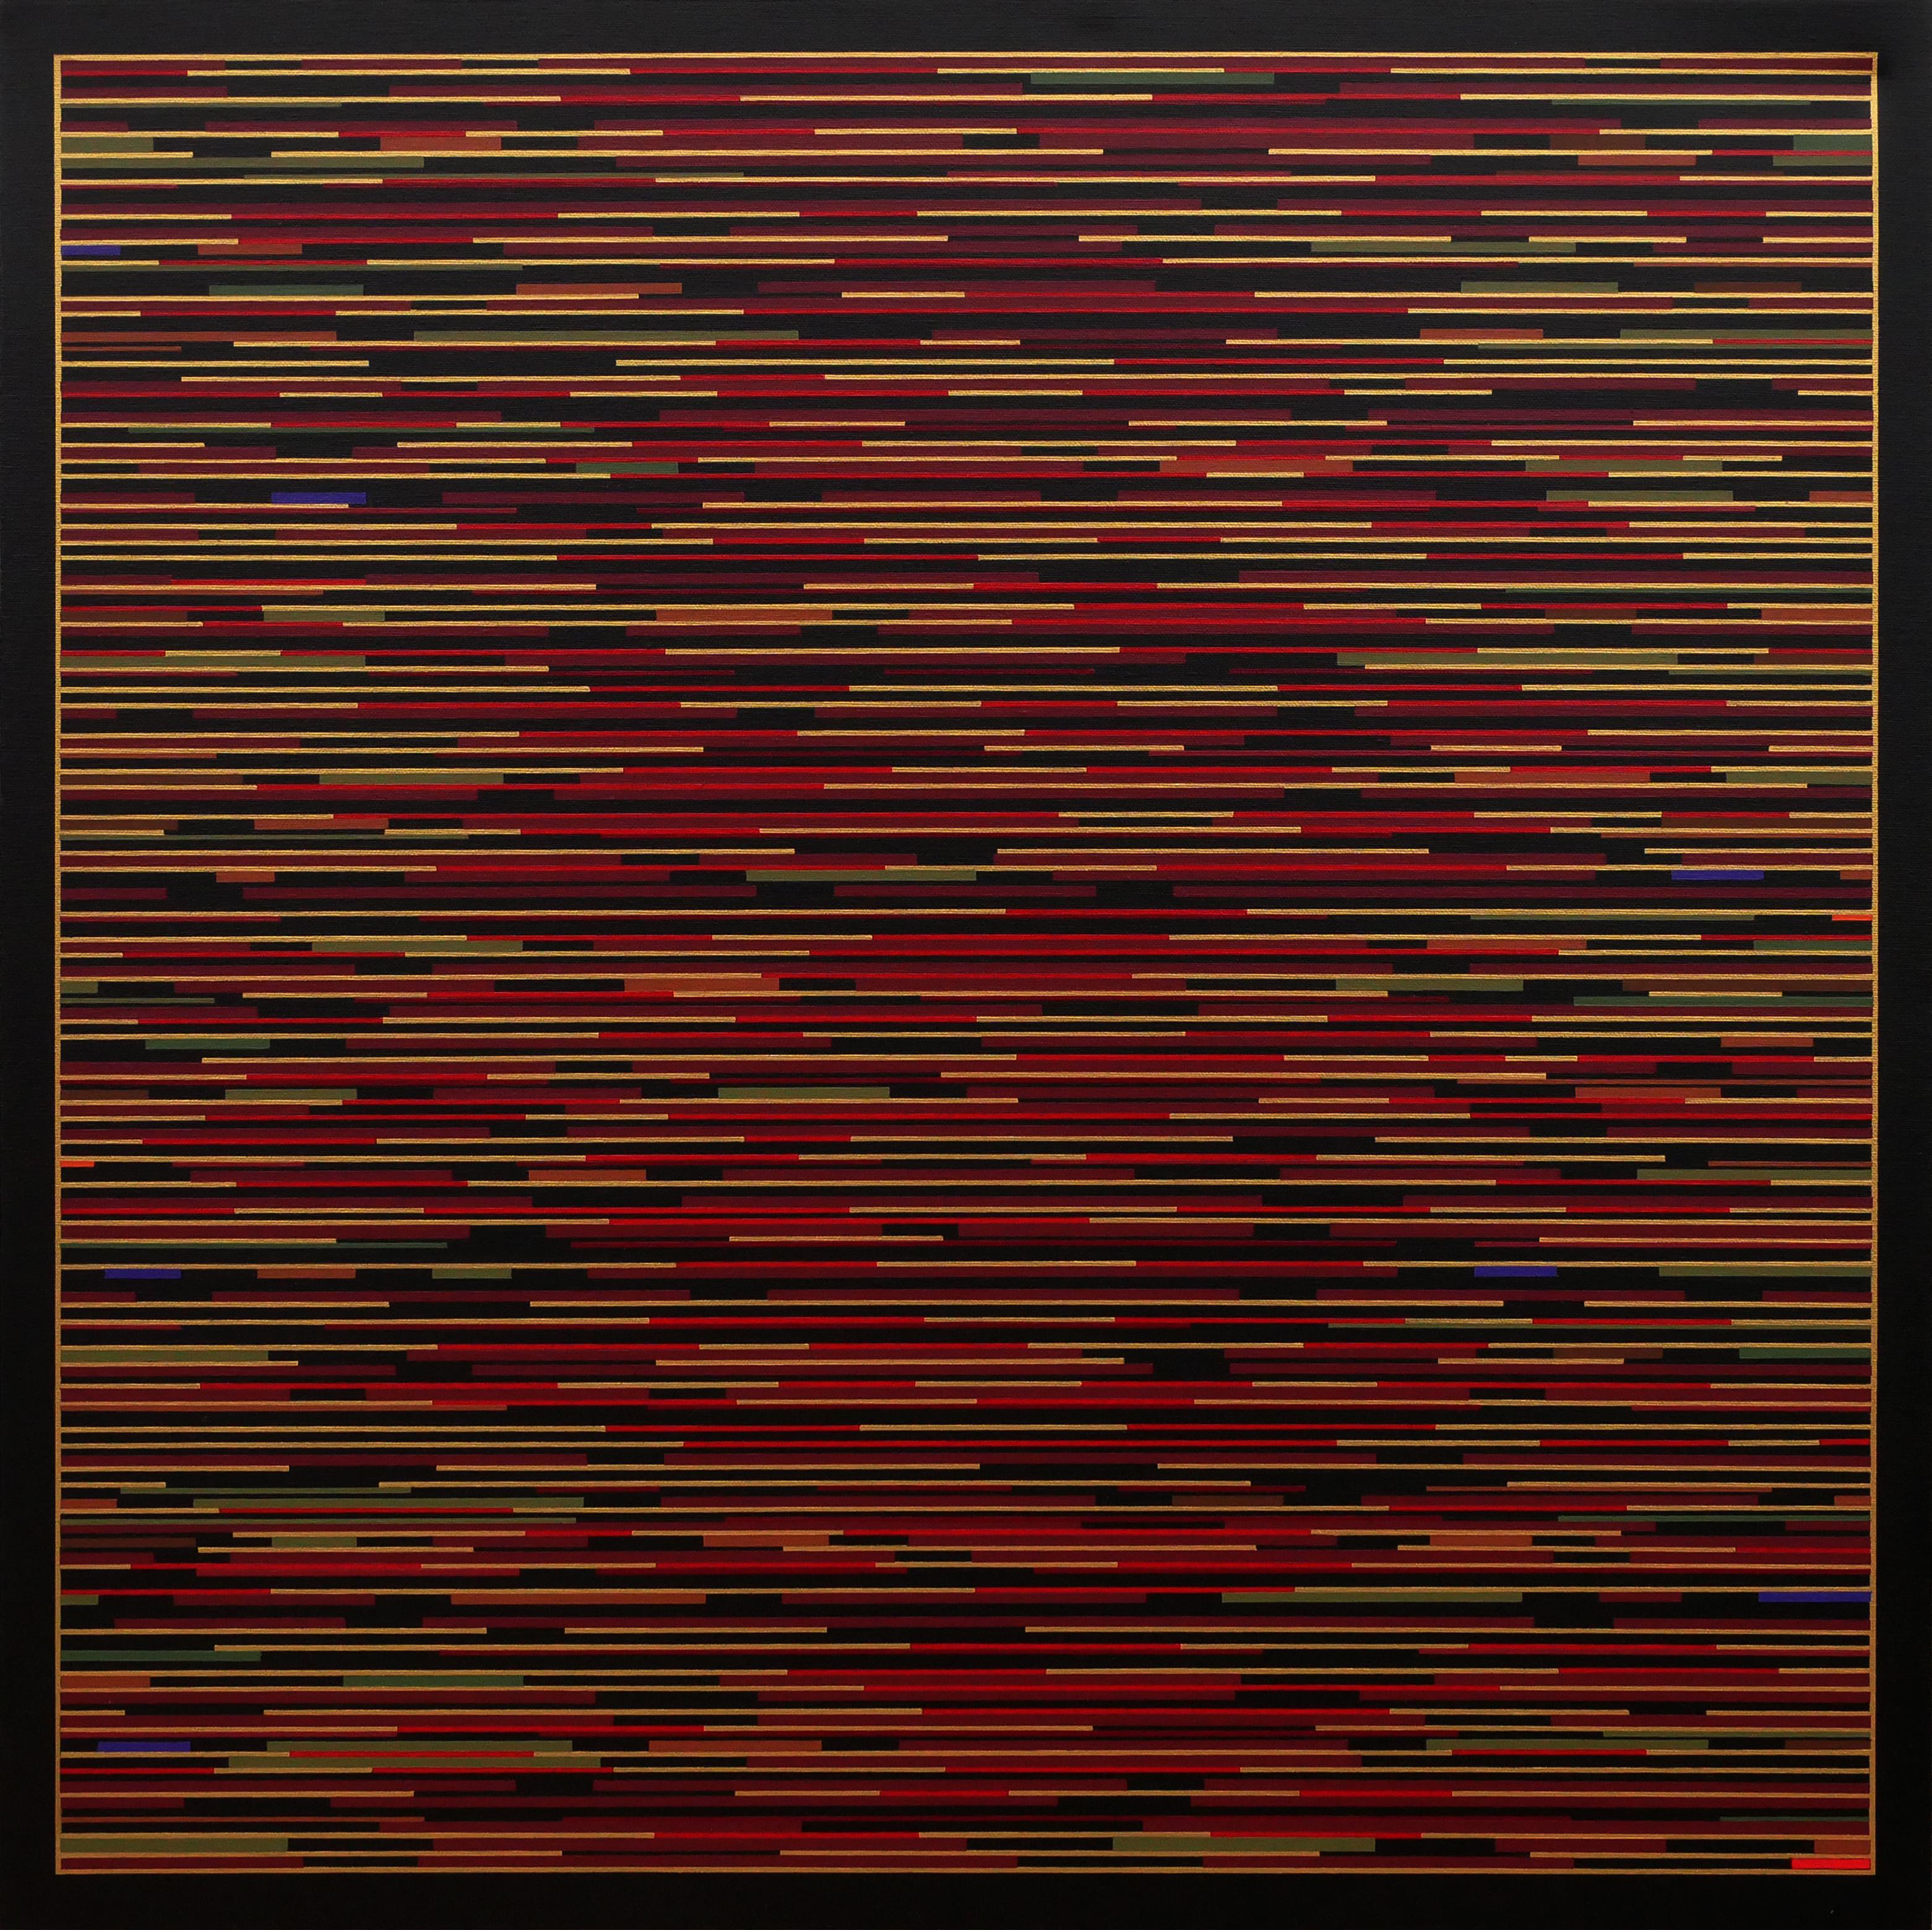 Mark Byckowski Abstract Painting - "VM 8" Red Striped Abstract Geometric Painting